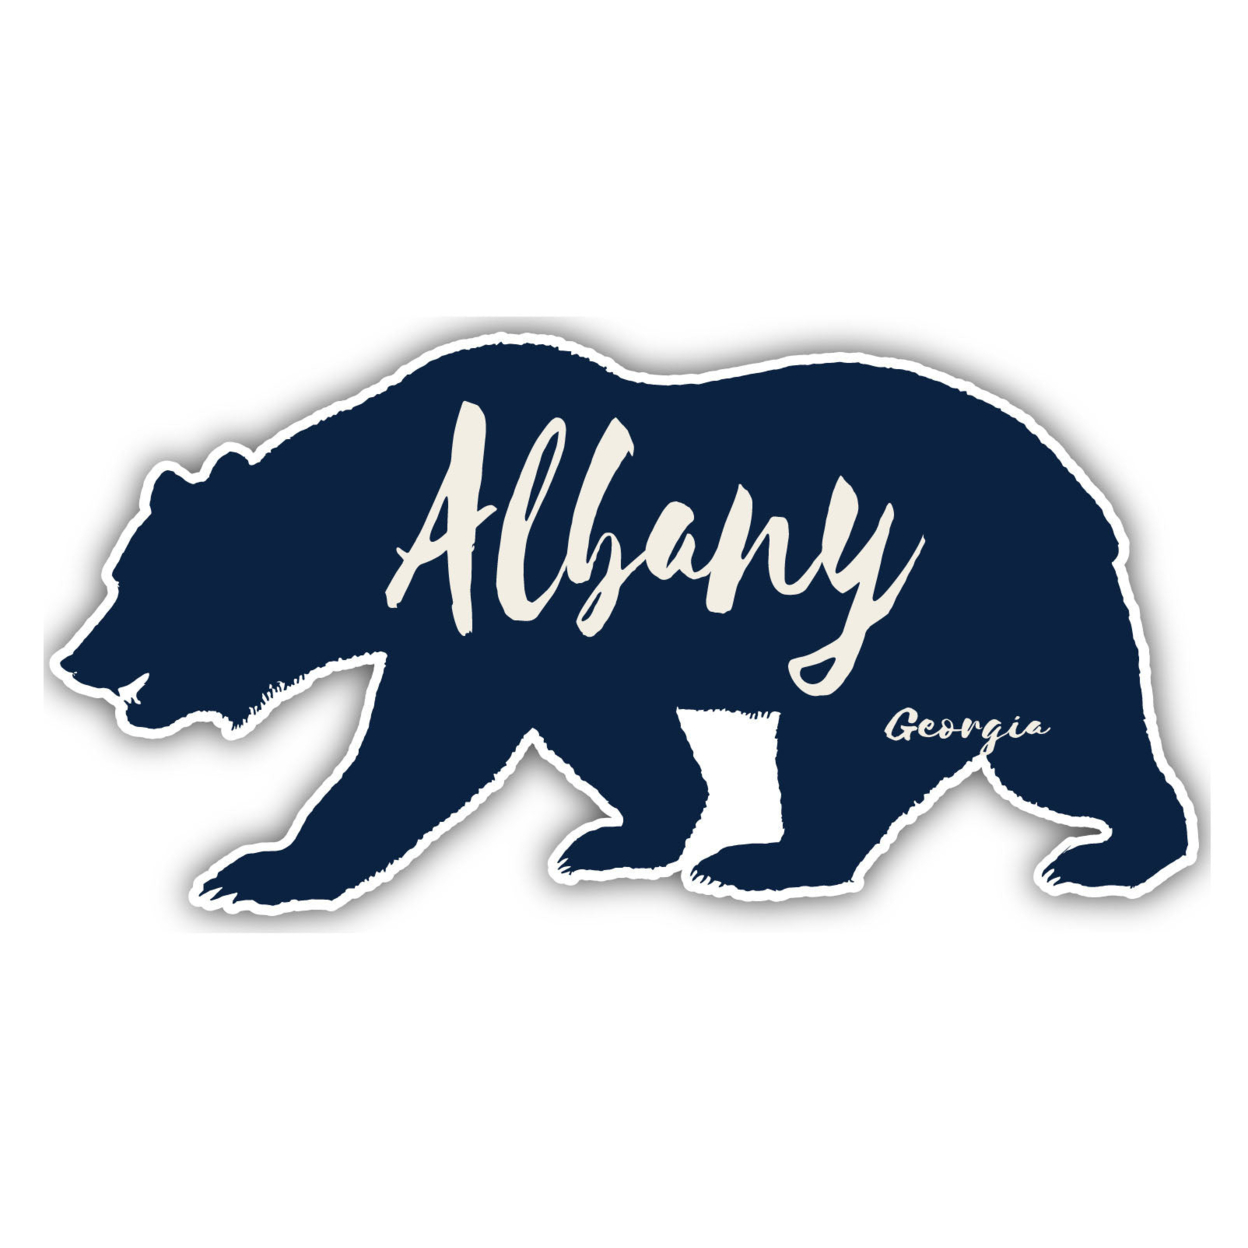 Albany Georgia Souvenir Decorative Stickers (Choose Theme And Size) - 4-Pack, 10-Inch, Tent